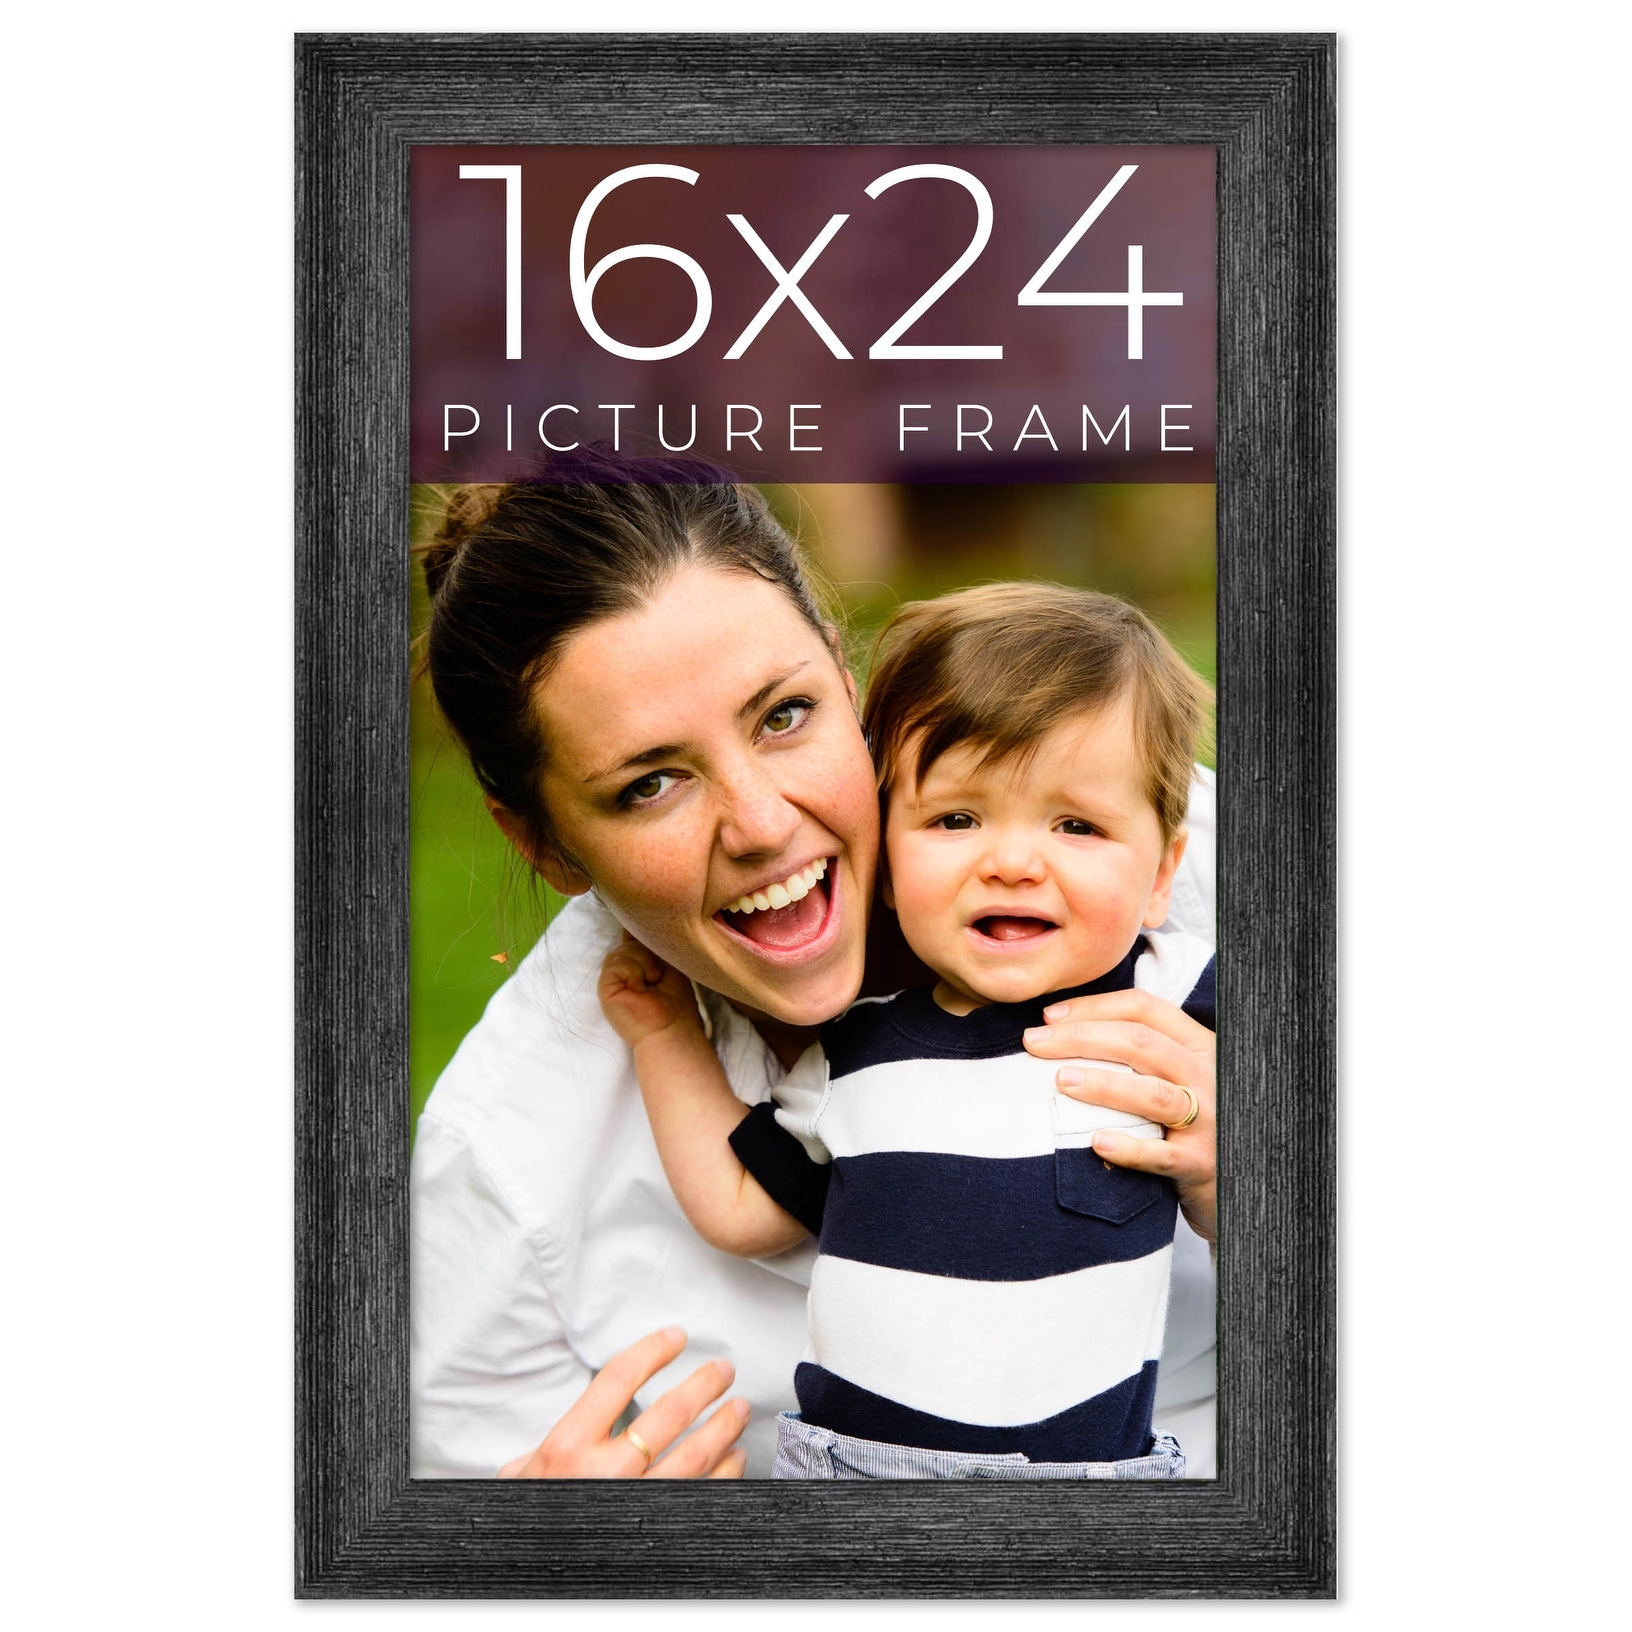 16x24 Picture Frame - Rustic Picture Frame Complete With UV